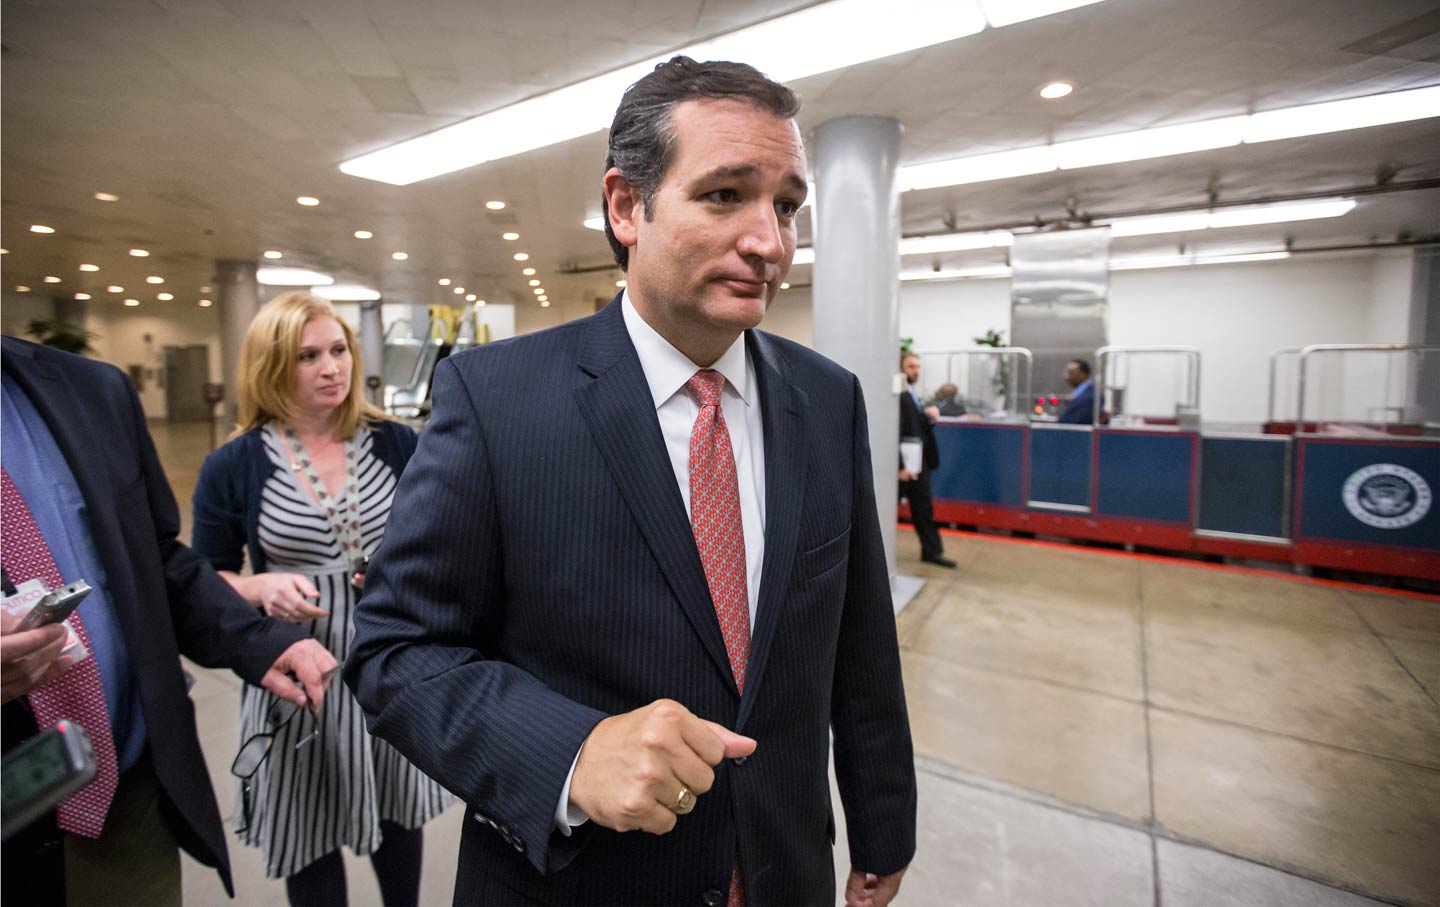 Sorry, Ted Cruz: Women Don’t Want Your ‘Rubbers’